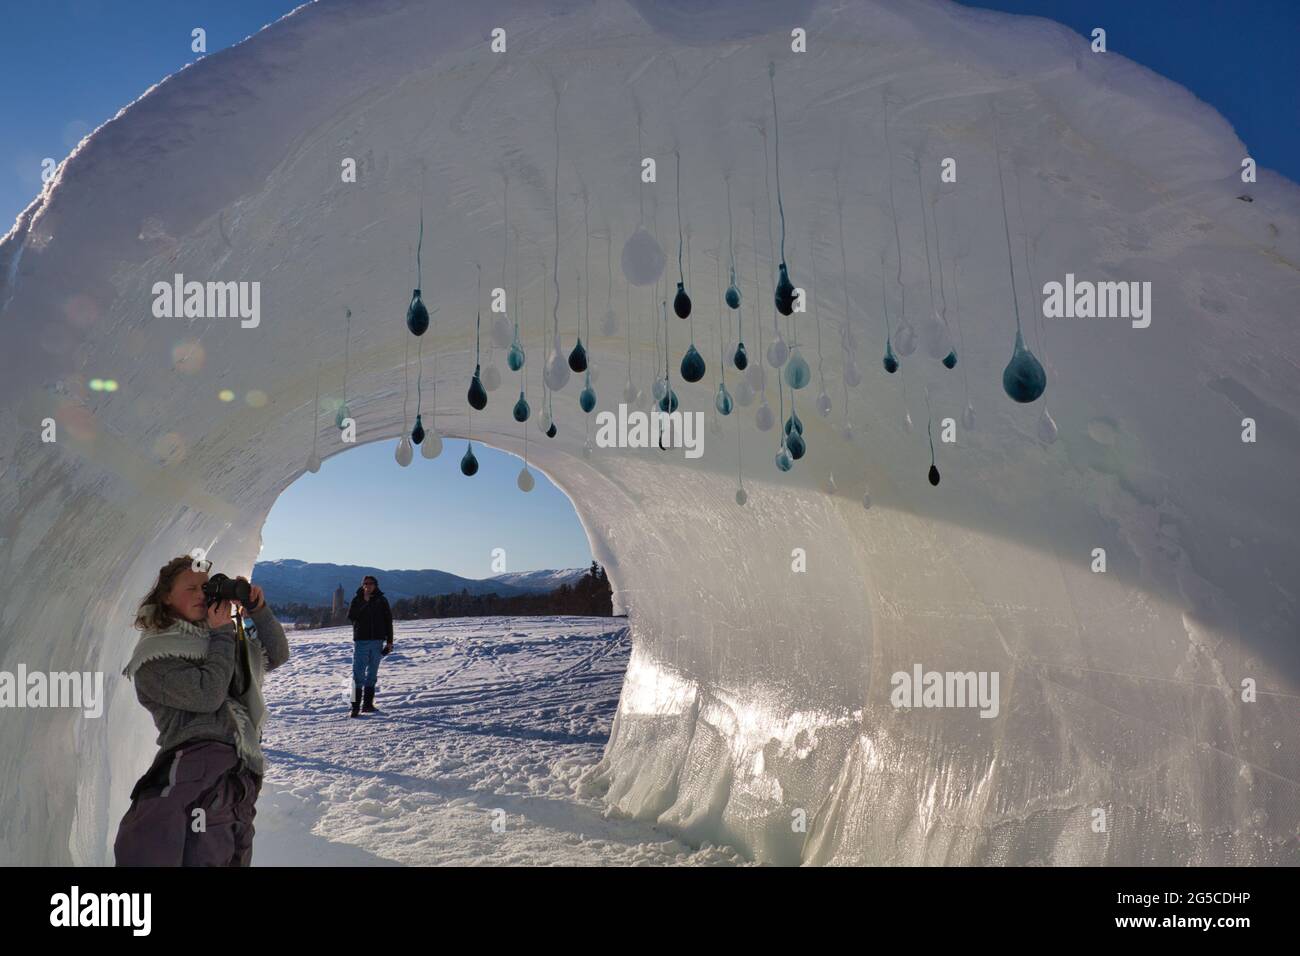 Man made exterior snow and ice art structure in Norway, Scandinavia Stock Photo